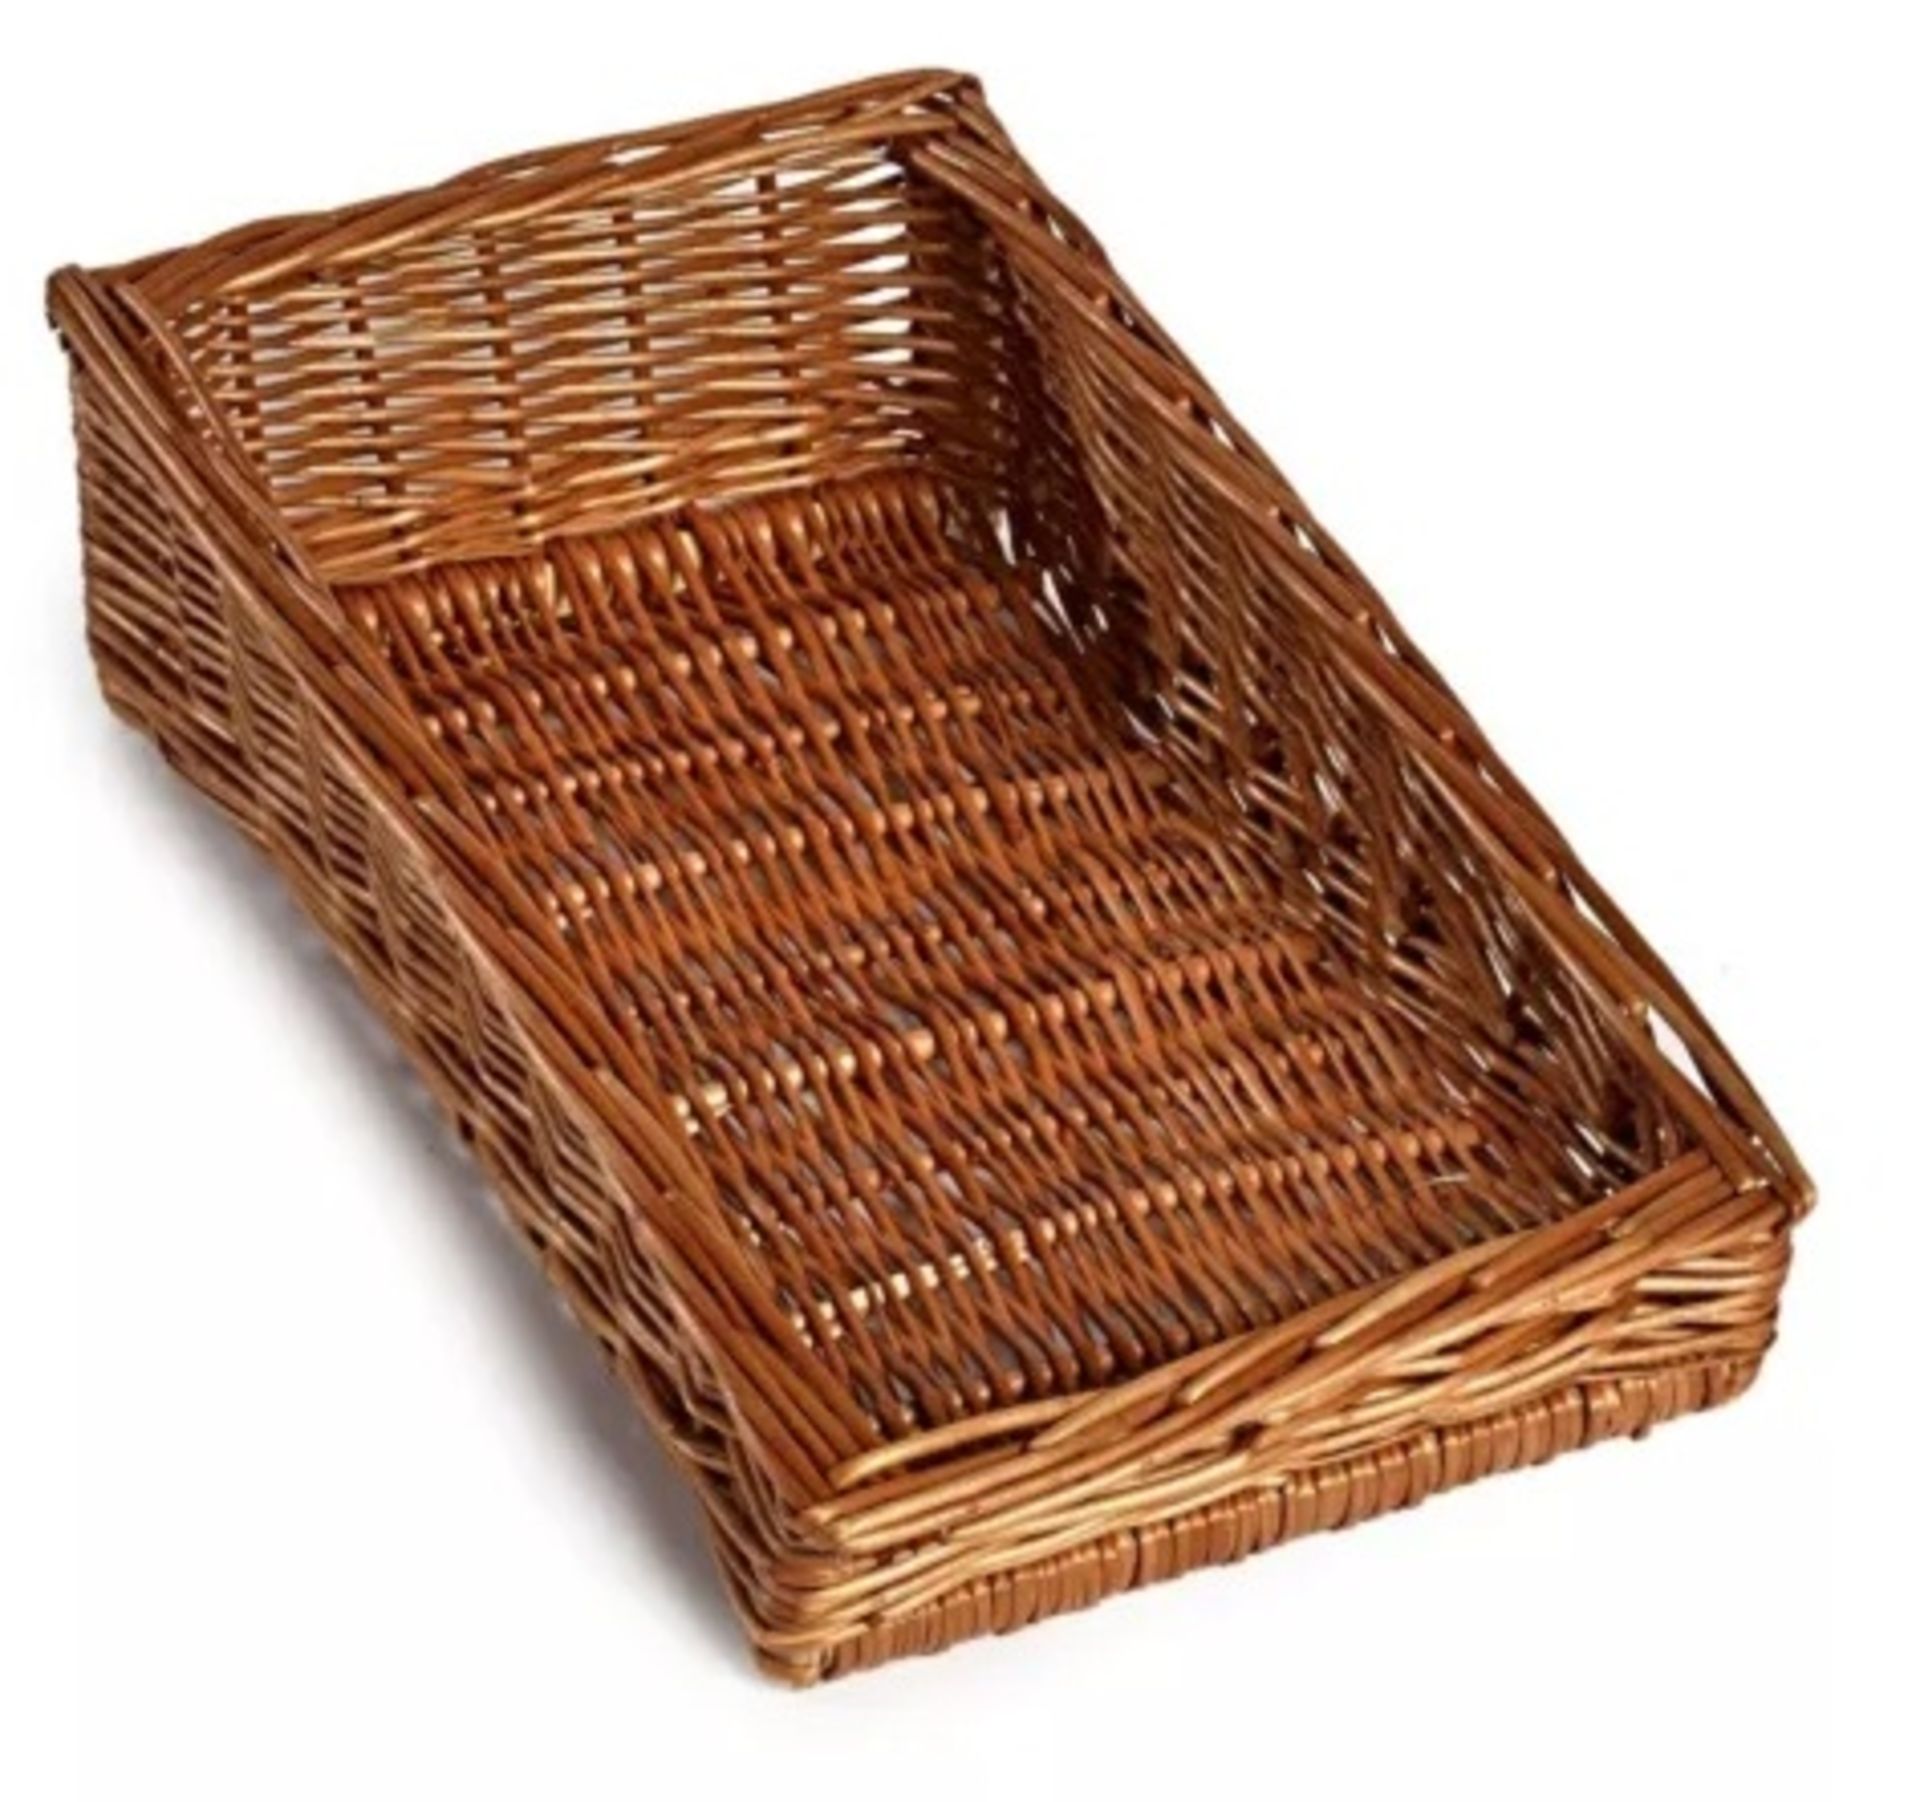 4 x Hand Woven Retail Display Sloping Wicker Baskets - Ideal For Presentation in Wide Range of